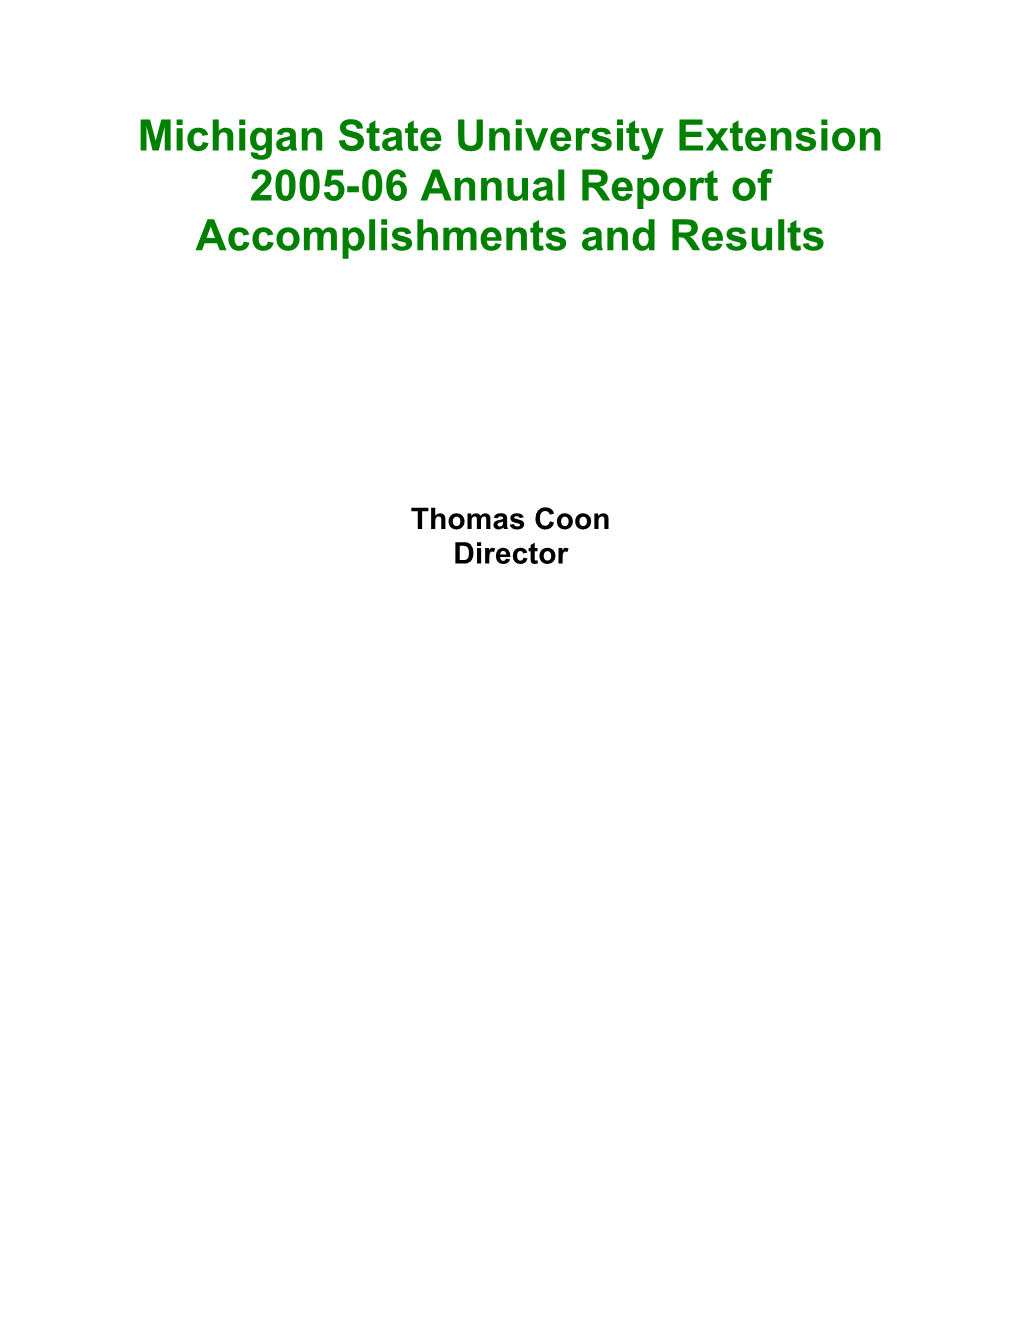 Michigan State University Extension 2005-06 Annual Report of Accomplishments and Results